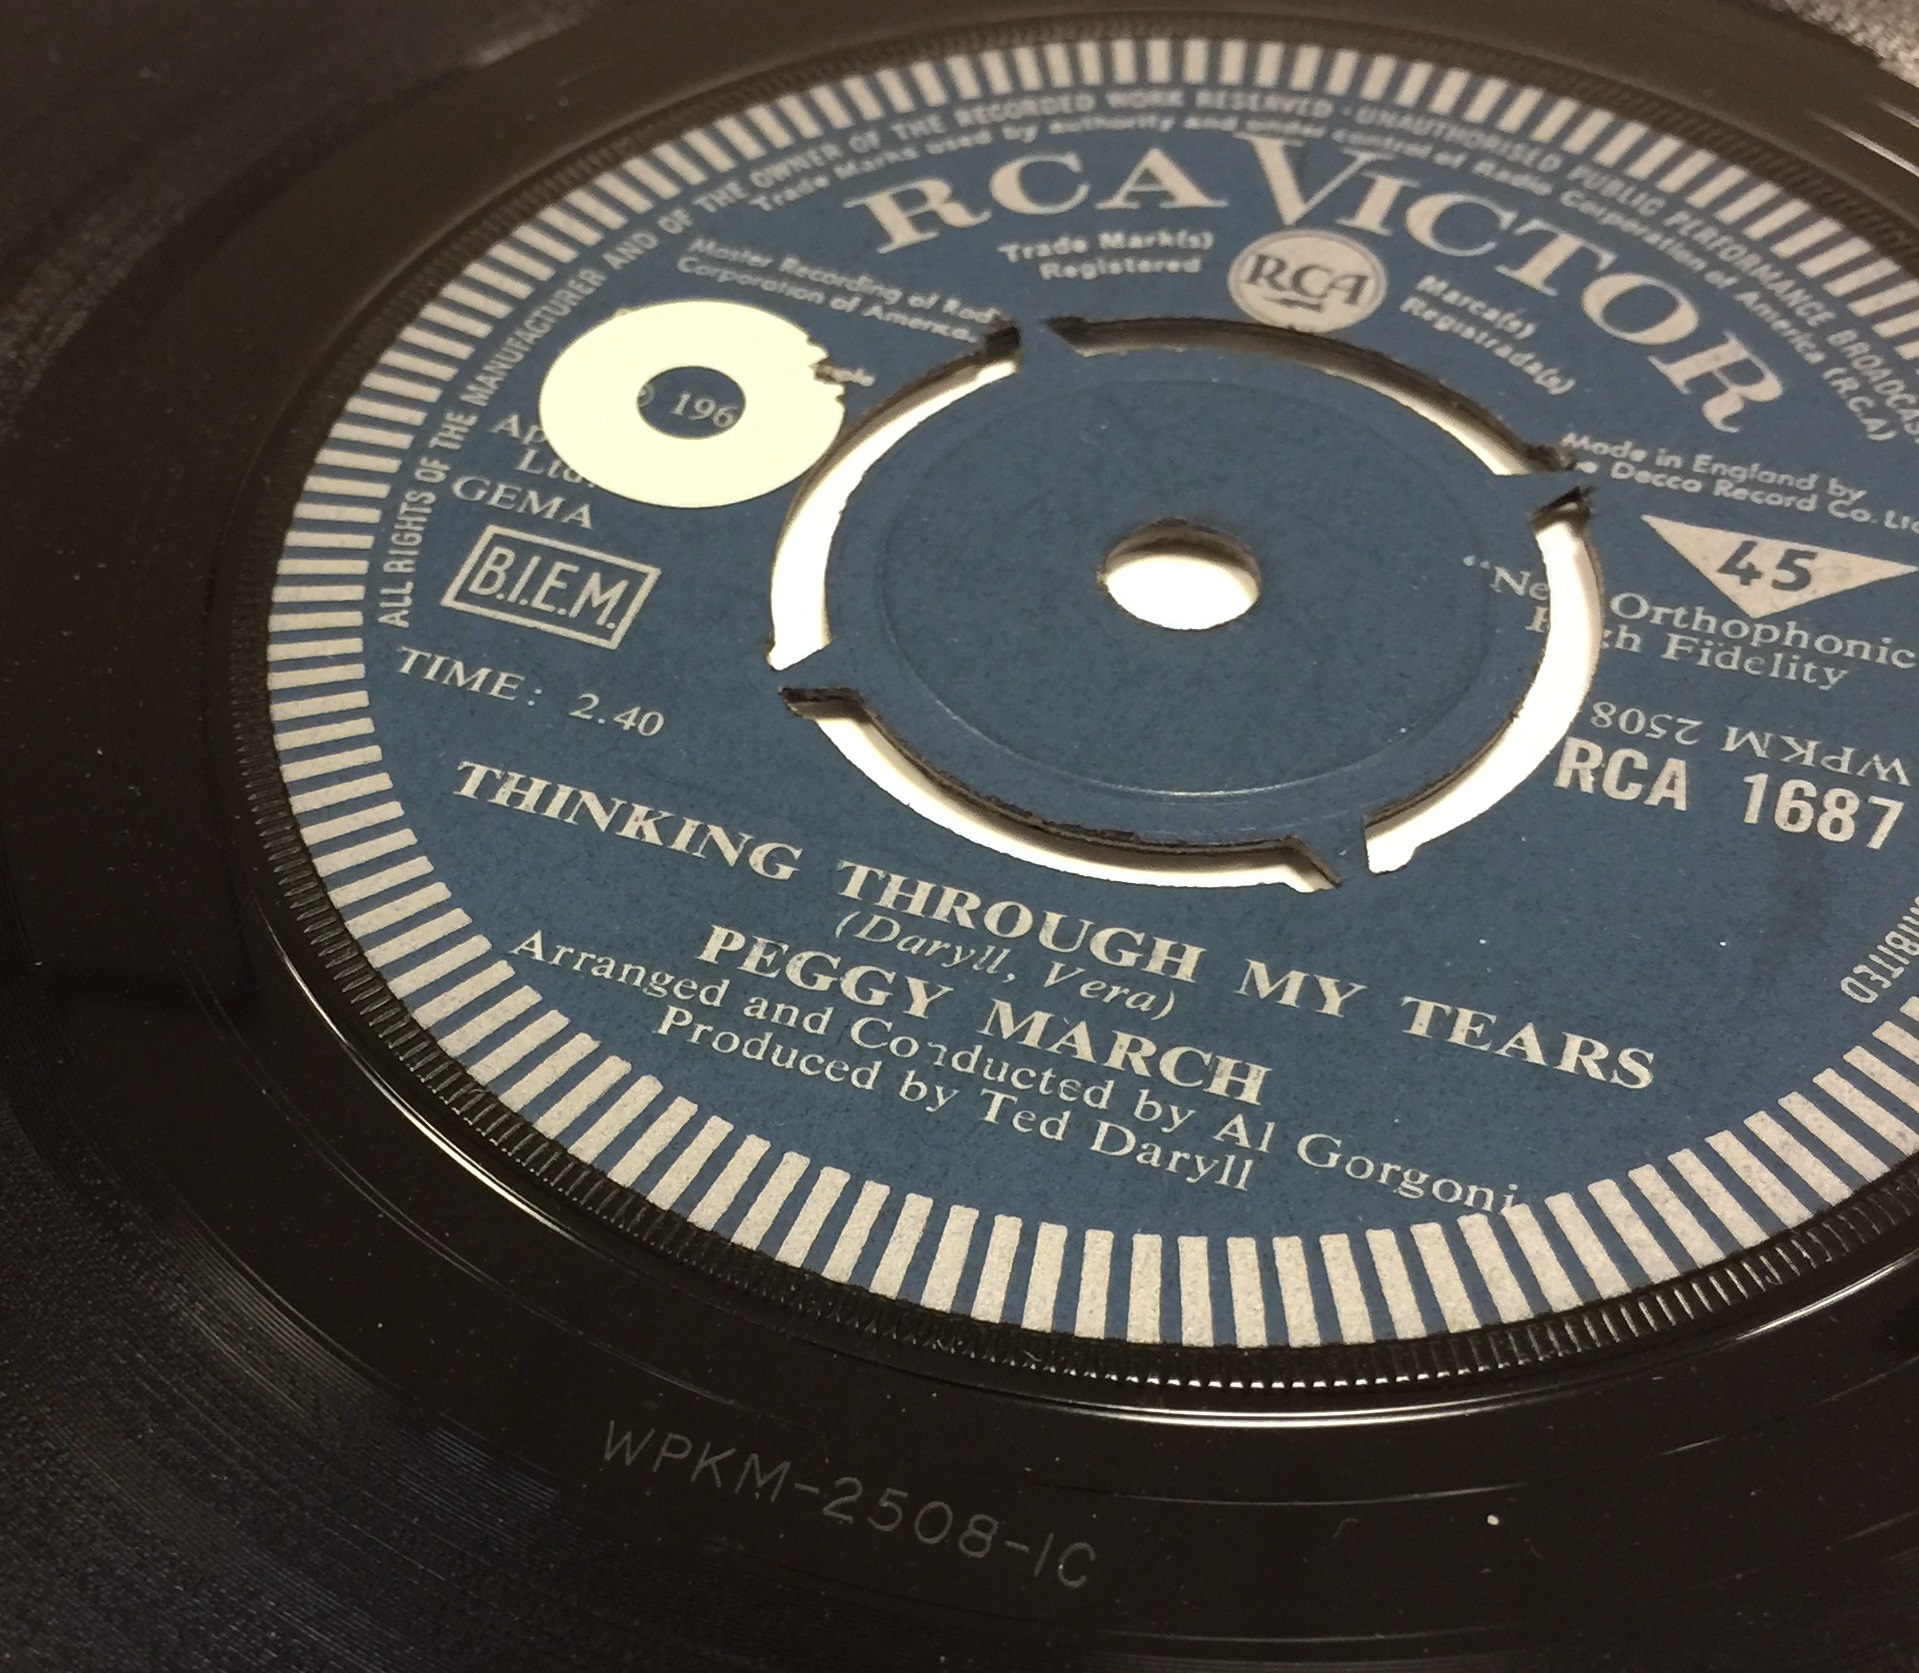 PEGGY MARCH - IF YOU LOVED ME (SOUL COAXING) / THINKING THROUGH MY TEARS (RCA 1687 DEMO). - Image 3 of 5